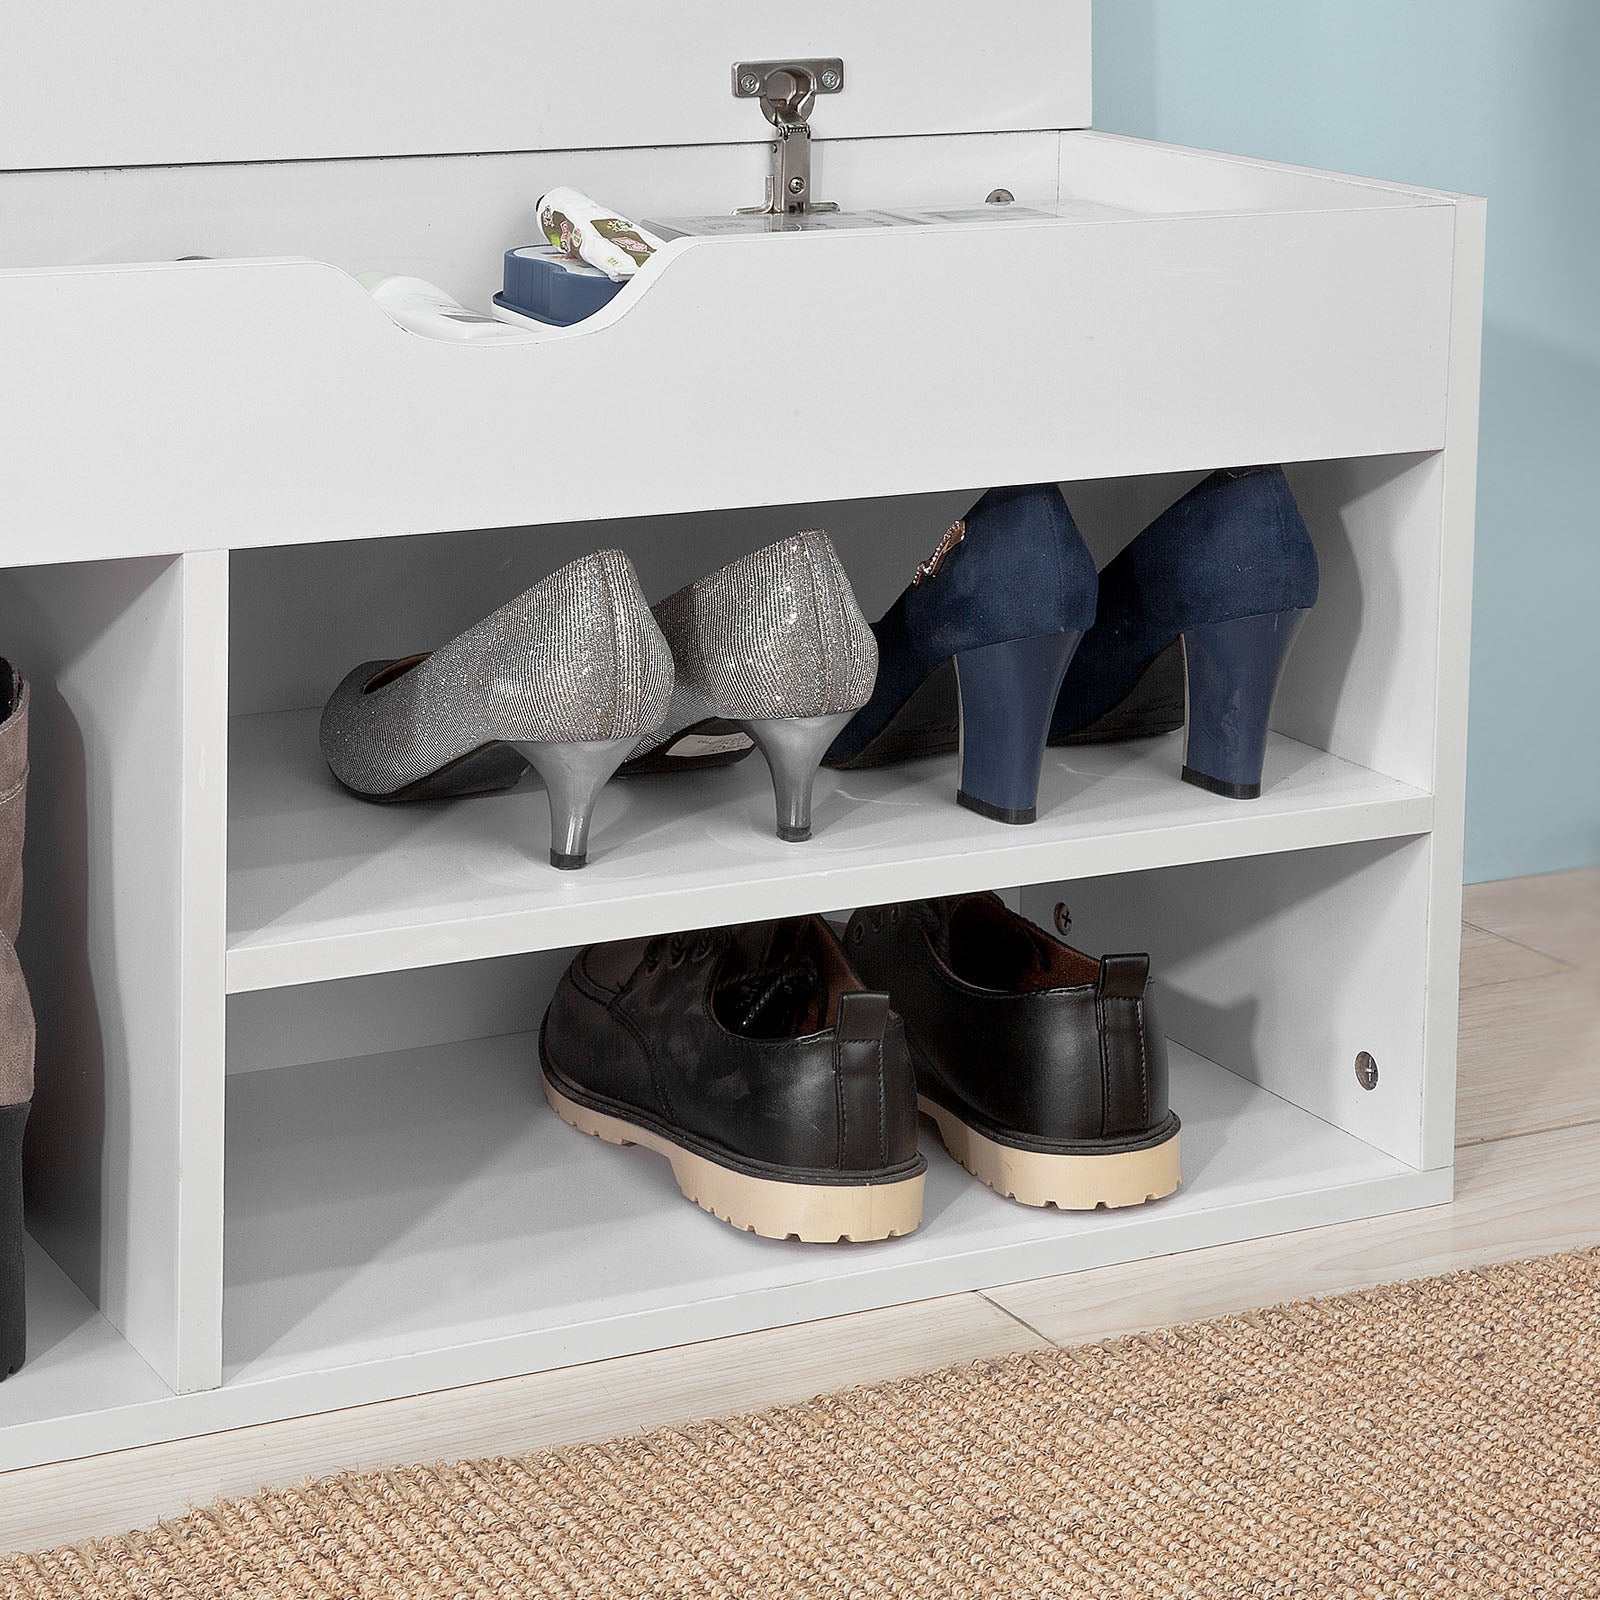 SoBuy FSR45-HG,Shoe Storage Cabinet,Shoe Rack Shoe Bench with Lift Up Bench Top and Grey Cushion